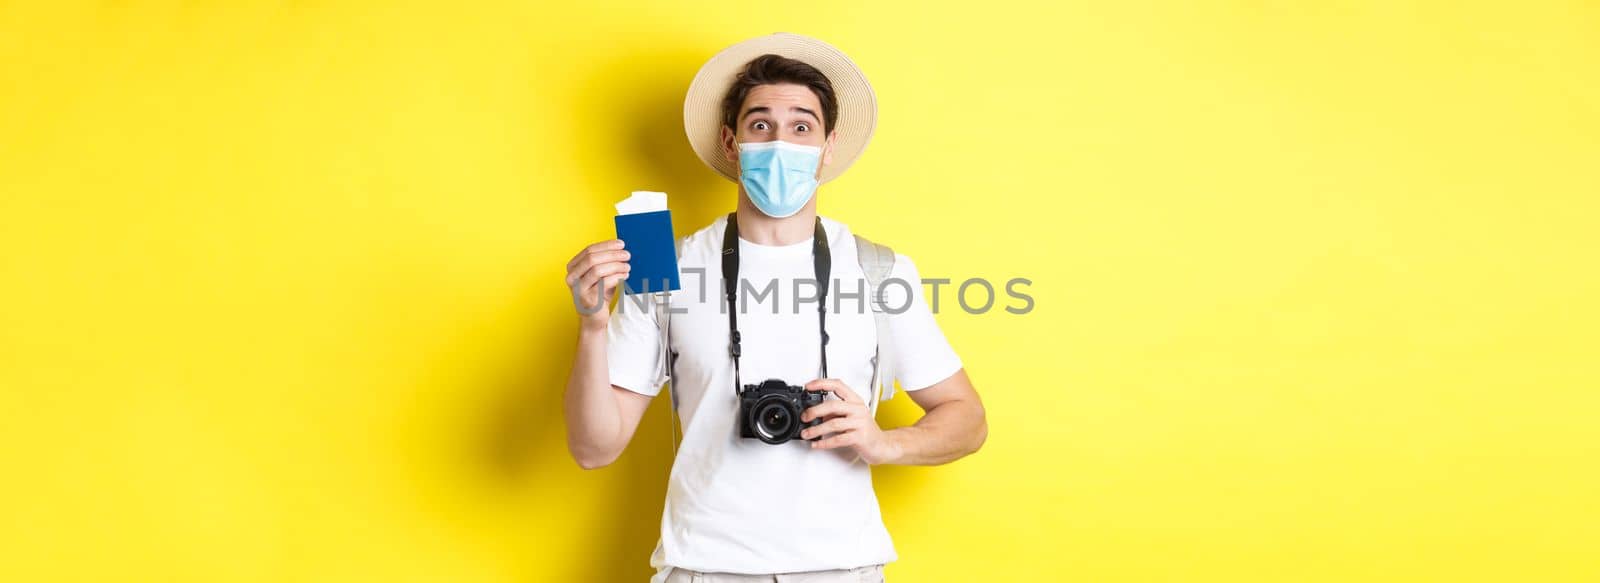 Concept of covid-19, travelling and quarantine. Happy man tourist with camera, showing passport and tickets for vacation, going on trip during pandemic, yellow background.